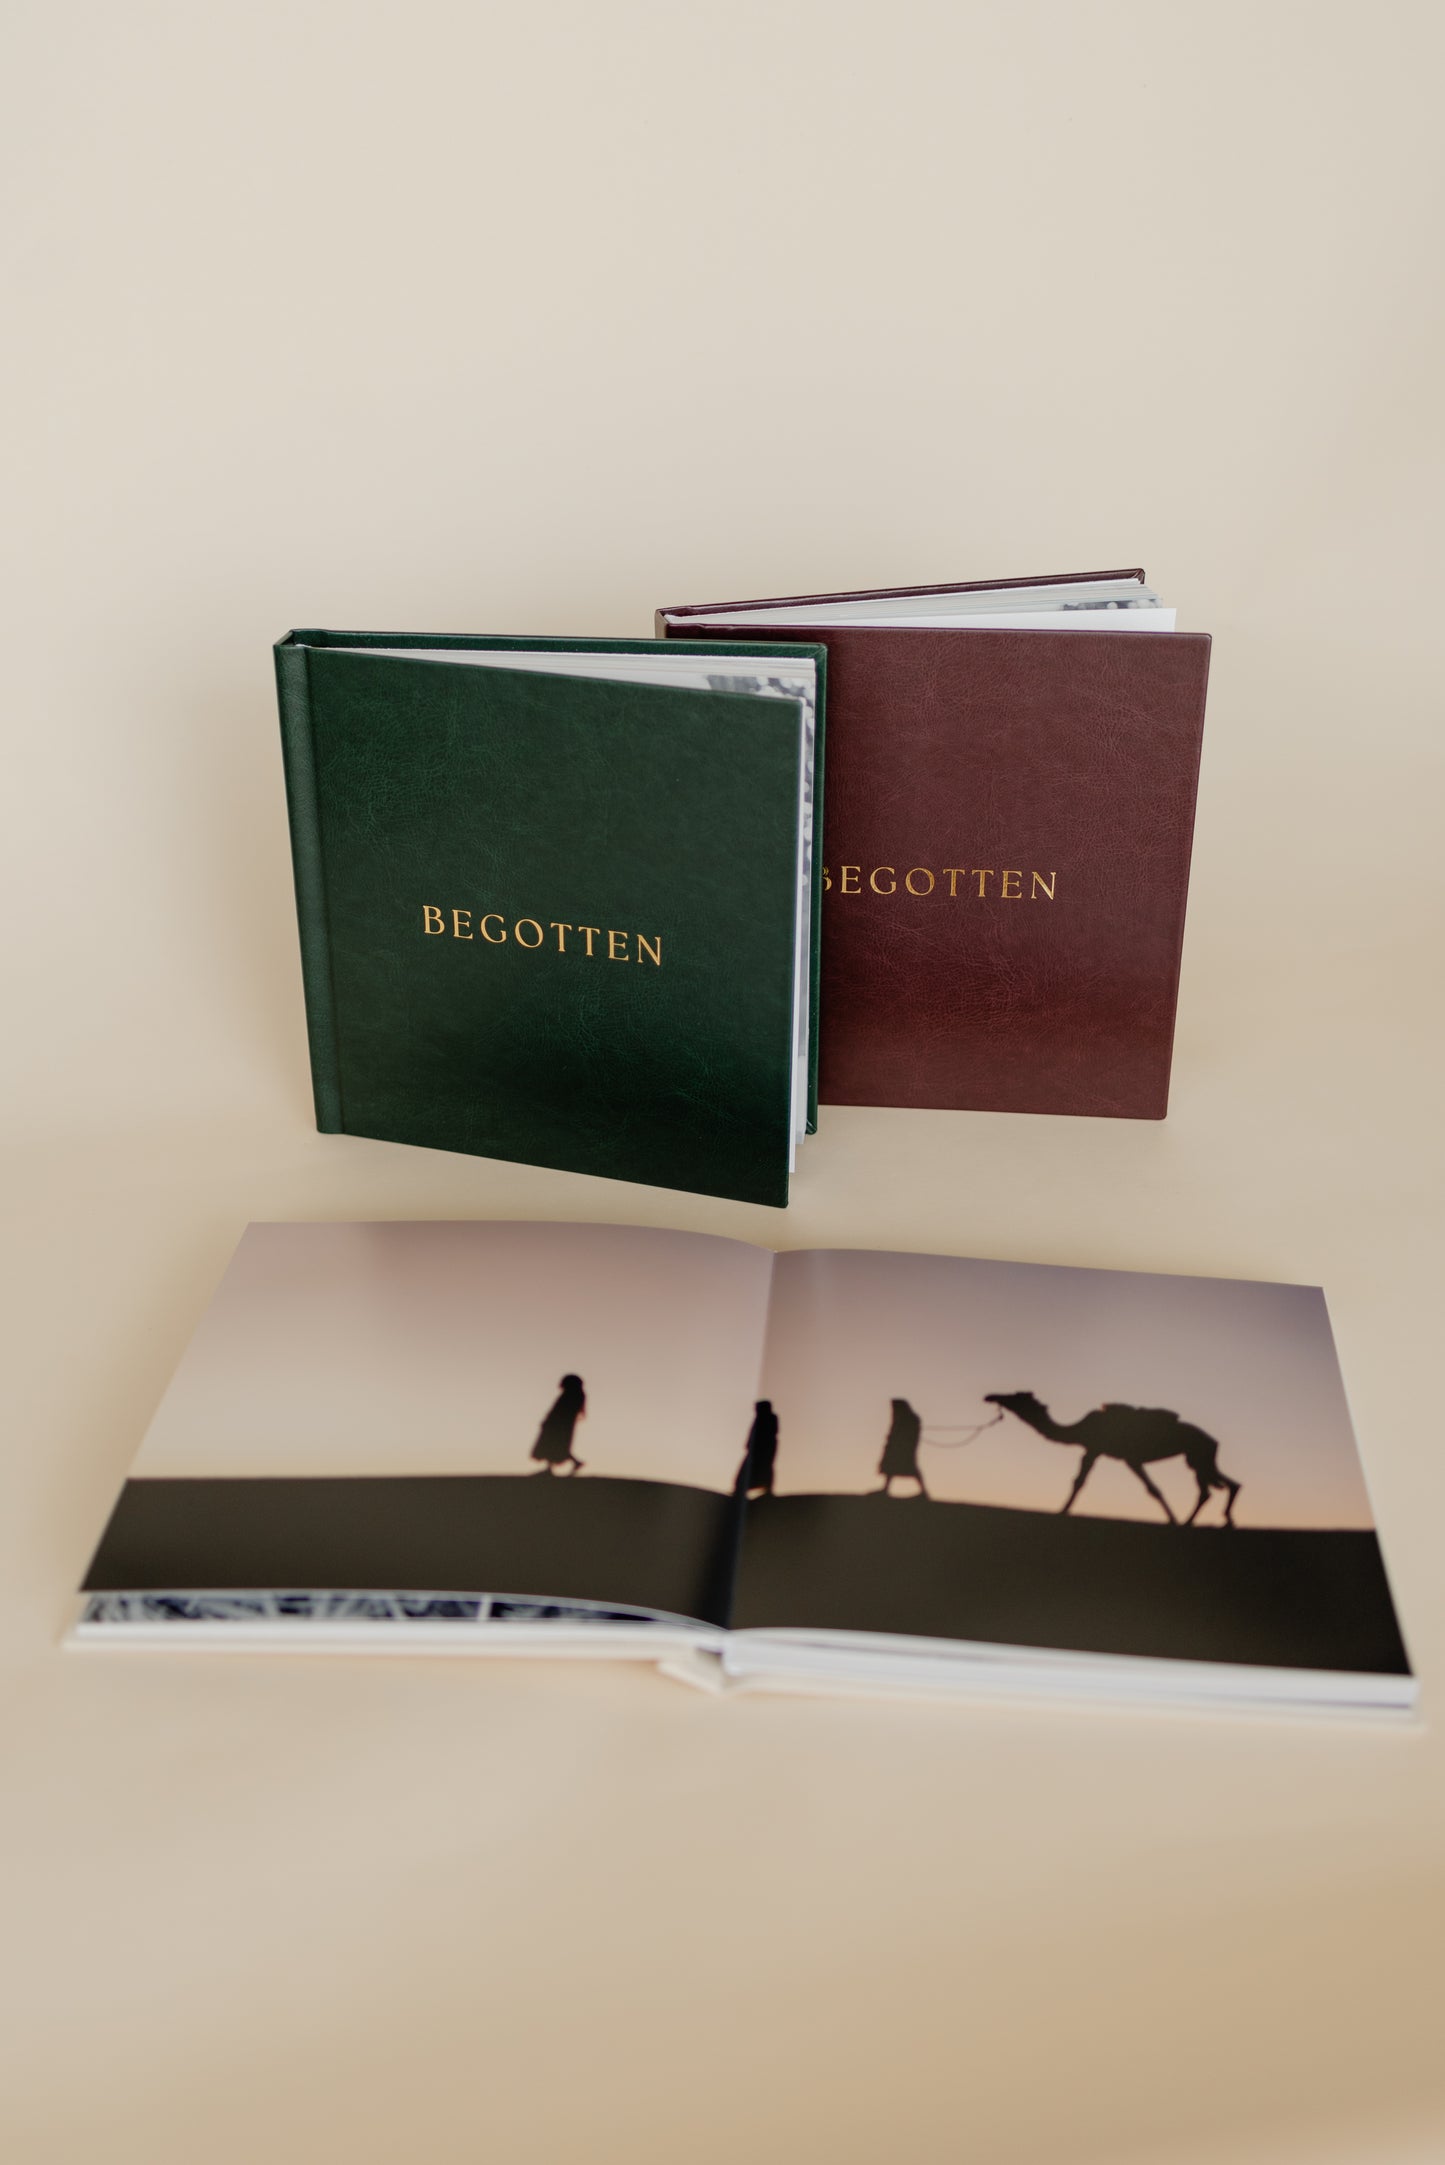 Elegant Christmas Coffee Table Books with photos of Jesus Christ inside